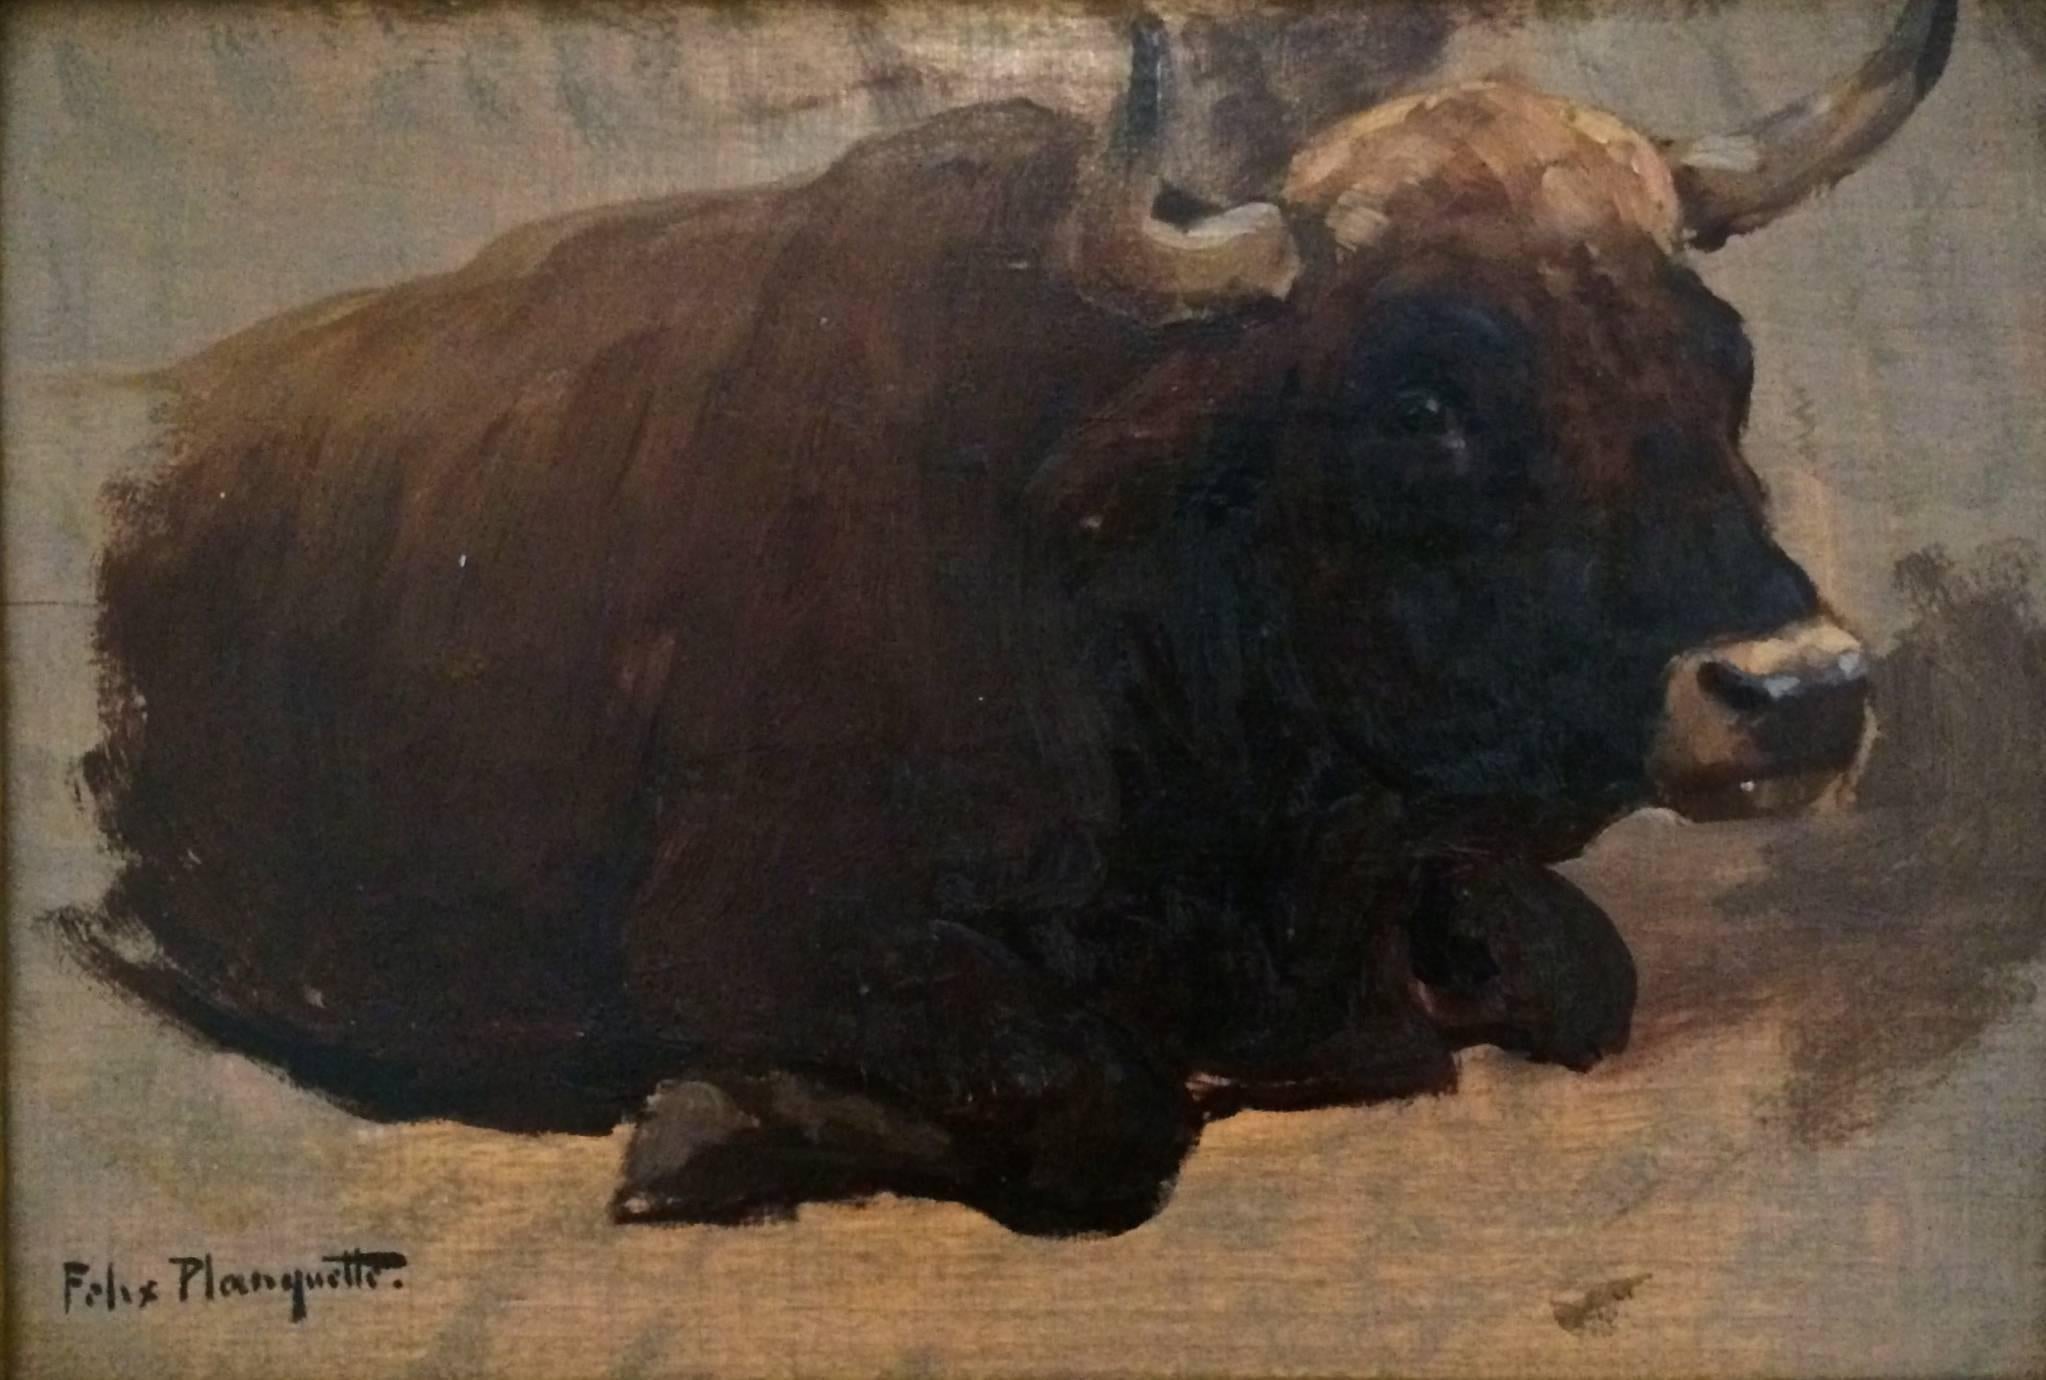 Felix Planquette (1873-1964) 
Study of a Bull, 
oil on cardboard, 17.6 x 26.8 cm

Renowned animal painter at the end of 19th-mid 20th century France, Felix Planquette, regularly exhibited at the Salon des Artistes Français and received the Rosa